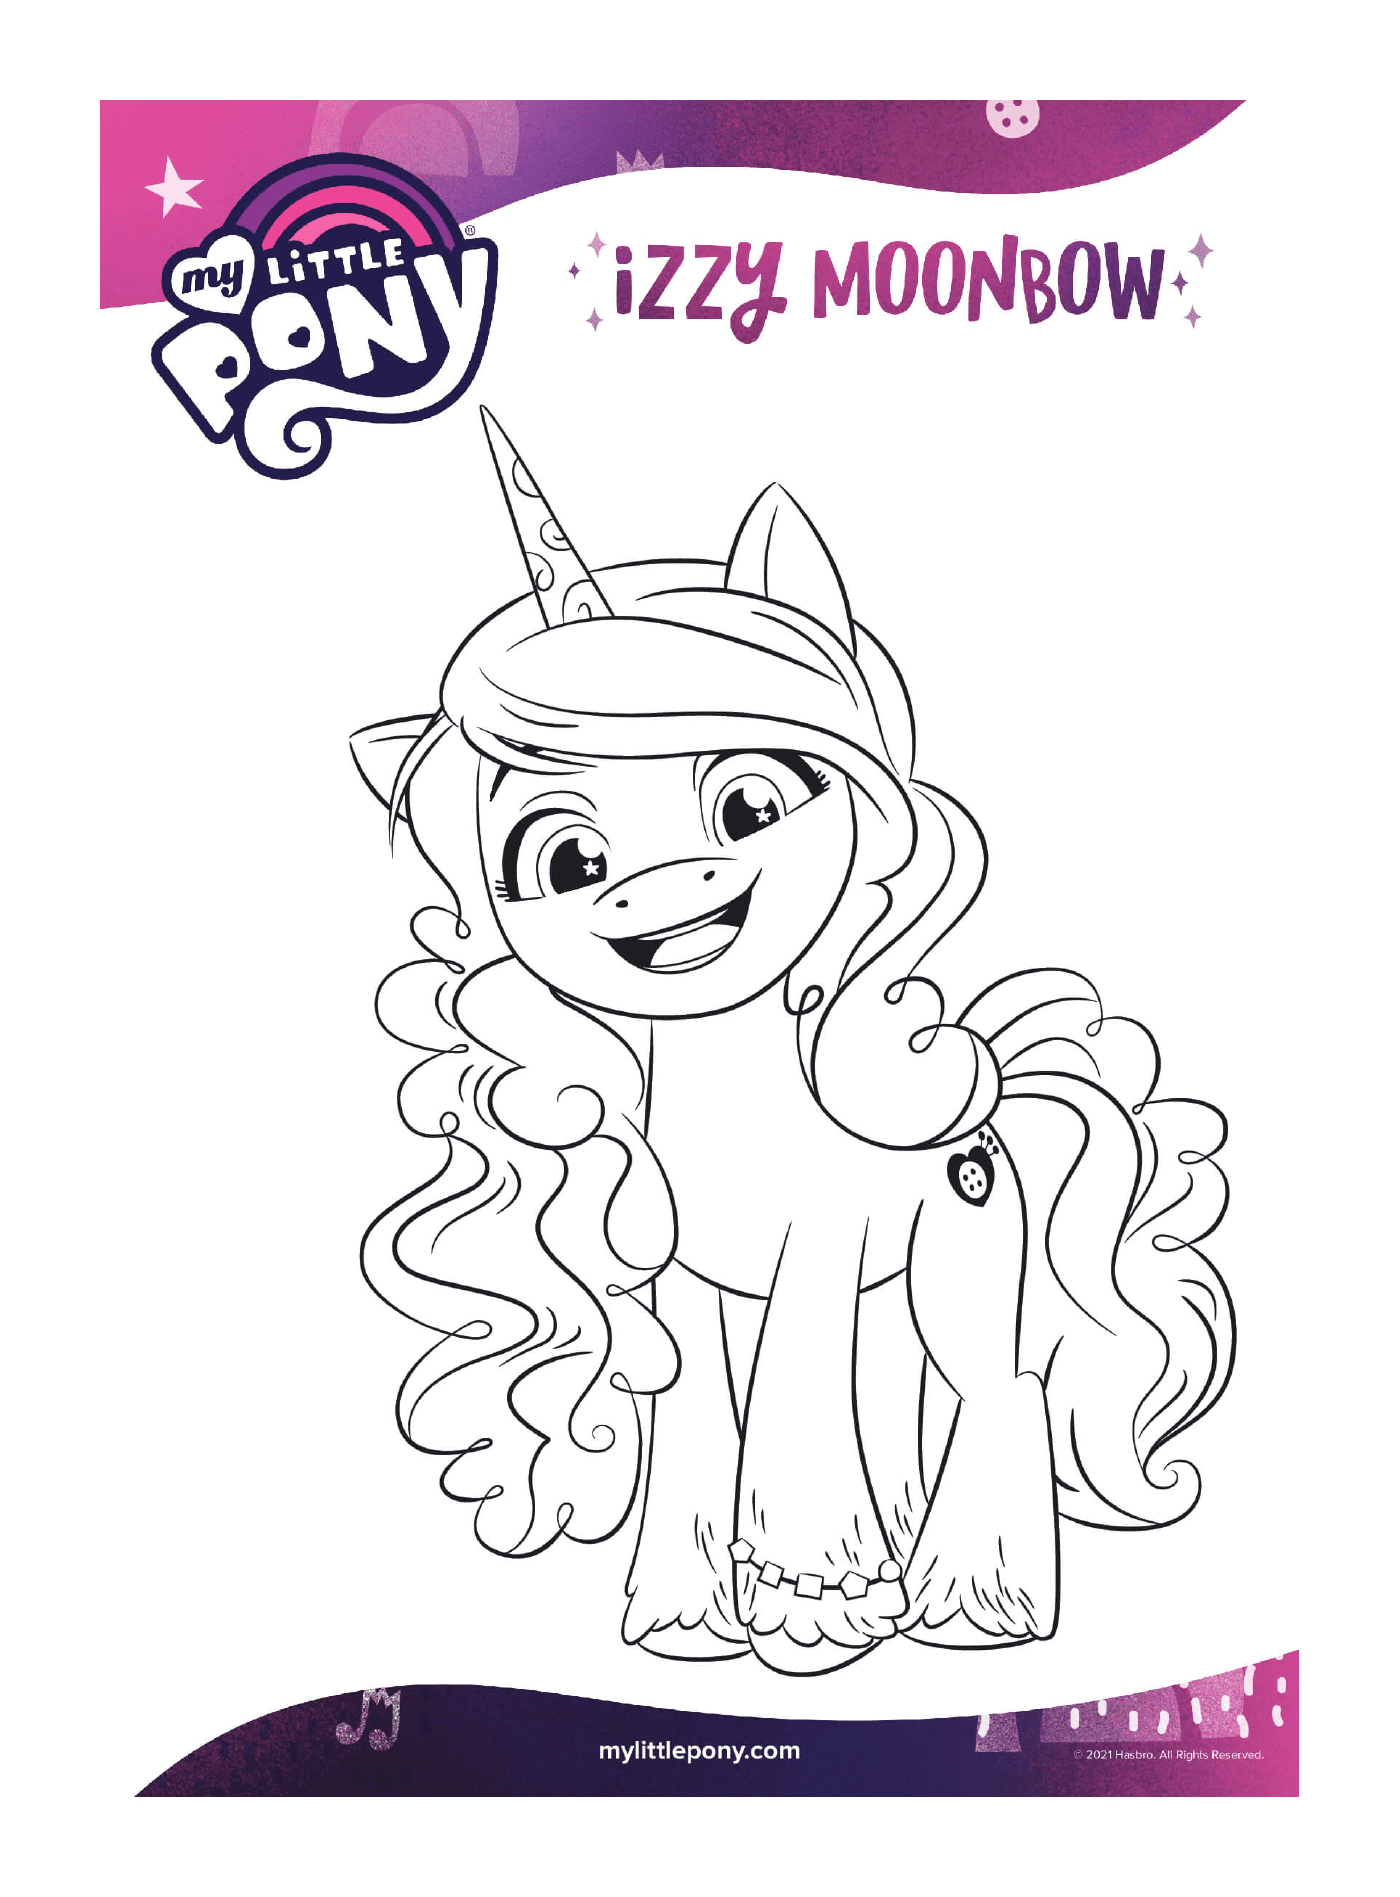 izzy moonbow loves crafting mlp 5